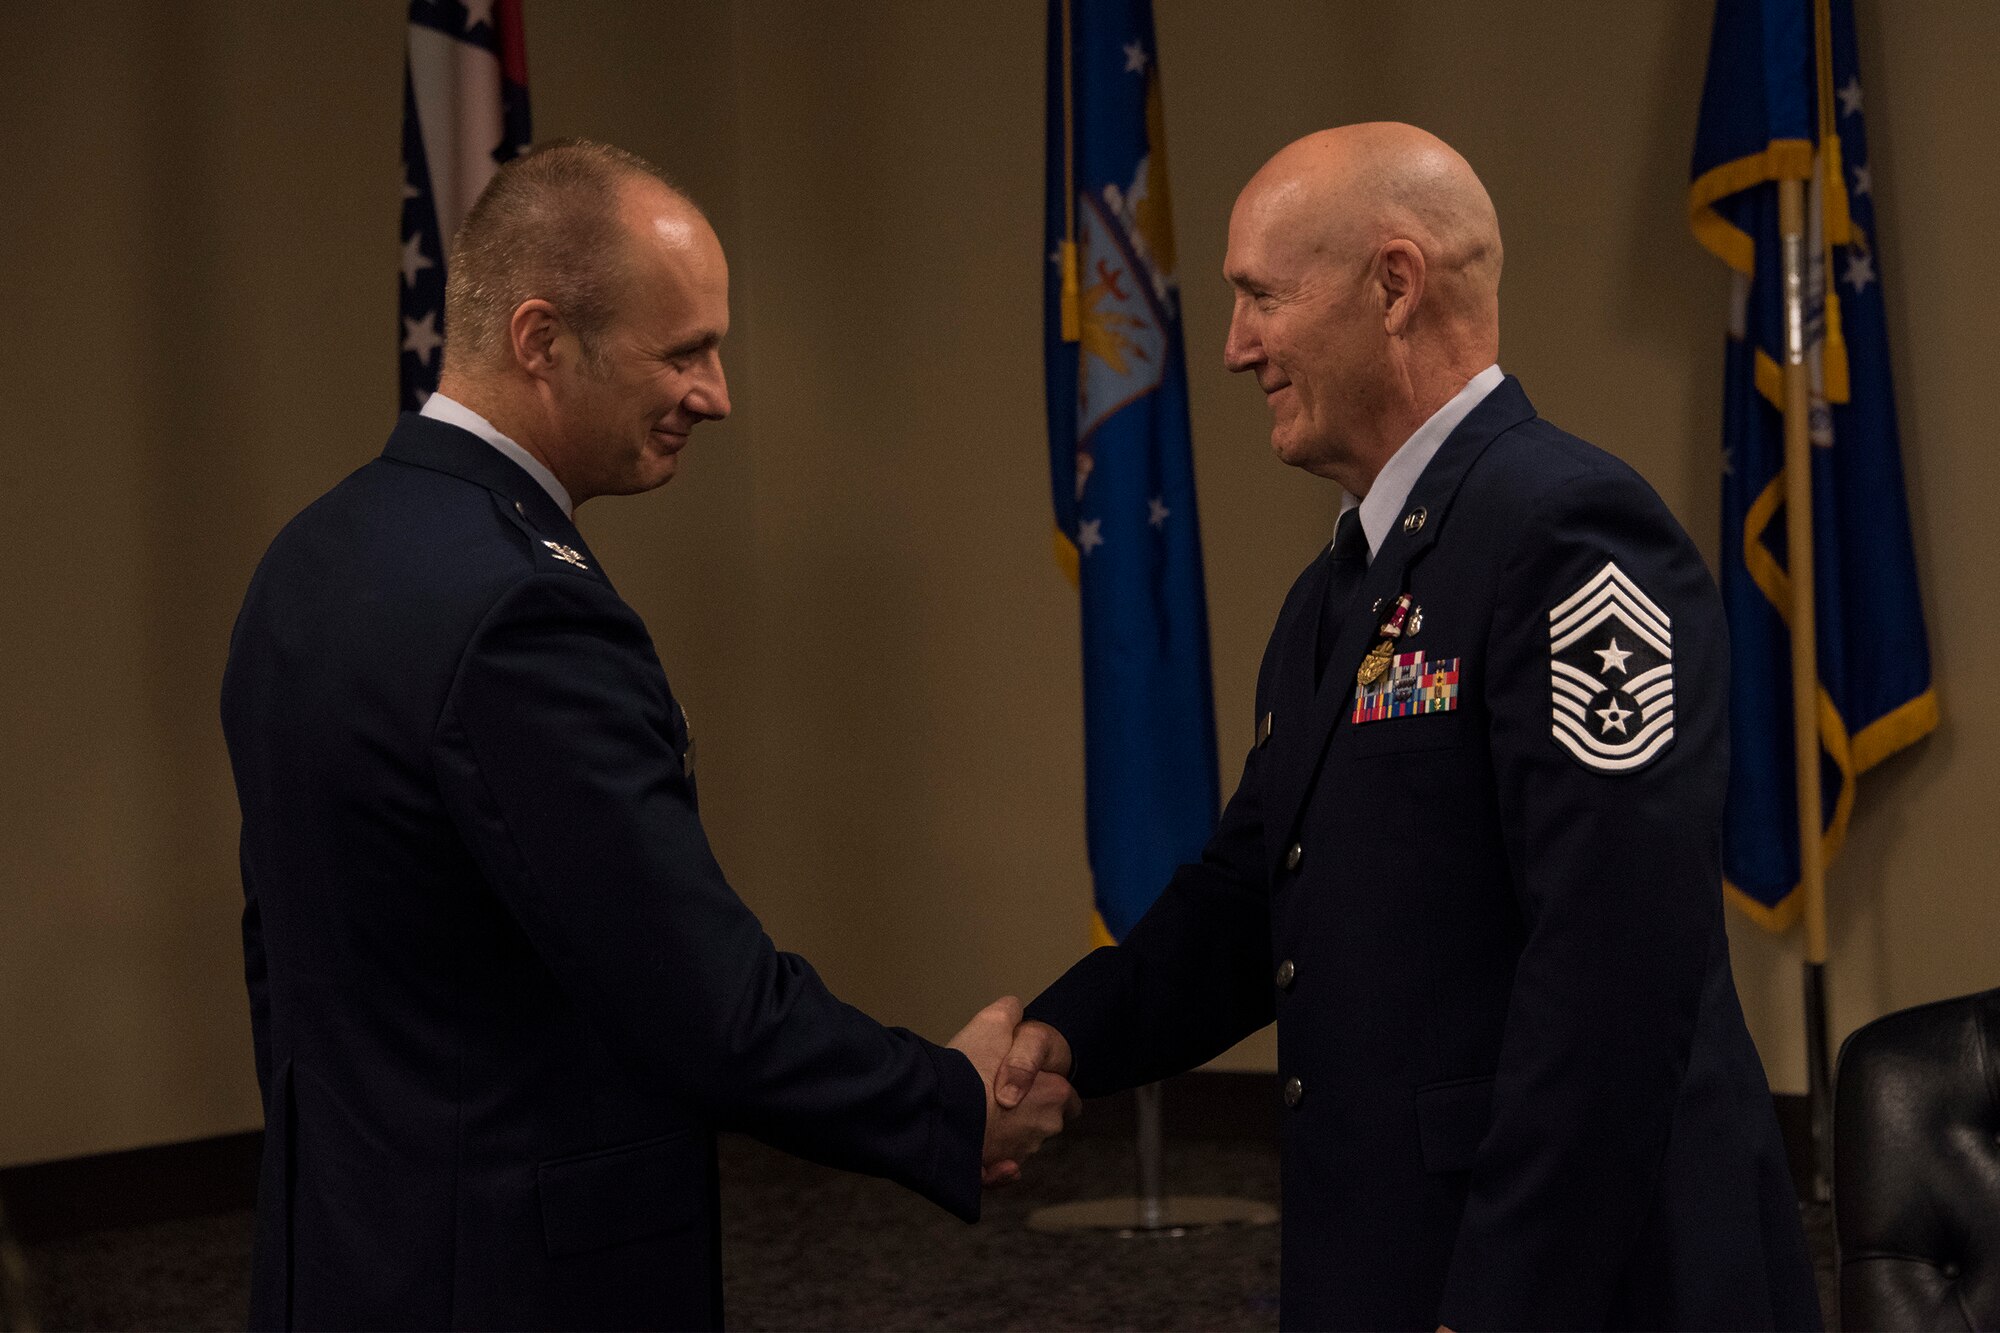 188th Wing Commander, Col. Robert I. Kinney, shakes hands with Chief Master Sgt. Stephen R. Bradley, 188th Wing command chief master sergeant, during a retirement ceremony held May 4, 2019, at Ebbing Air National Guard Base, Arkansas. Bradley served 37 years as a dental technician, first sergeant, and eventually 188th Wing command chief. (U.S. Air National Guard photo by Tech. Sgt. John E. Hillier)